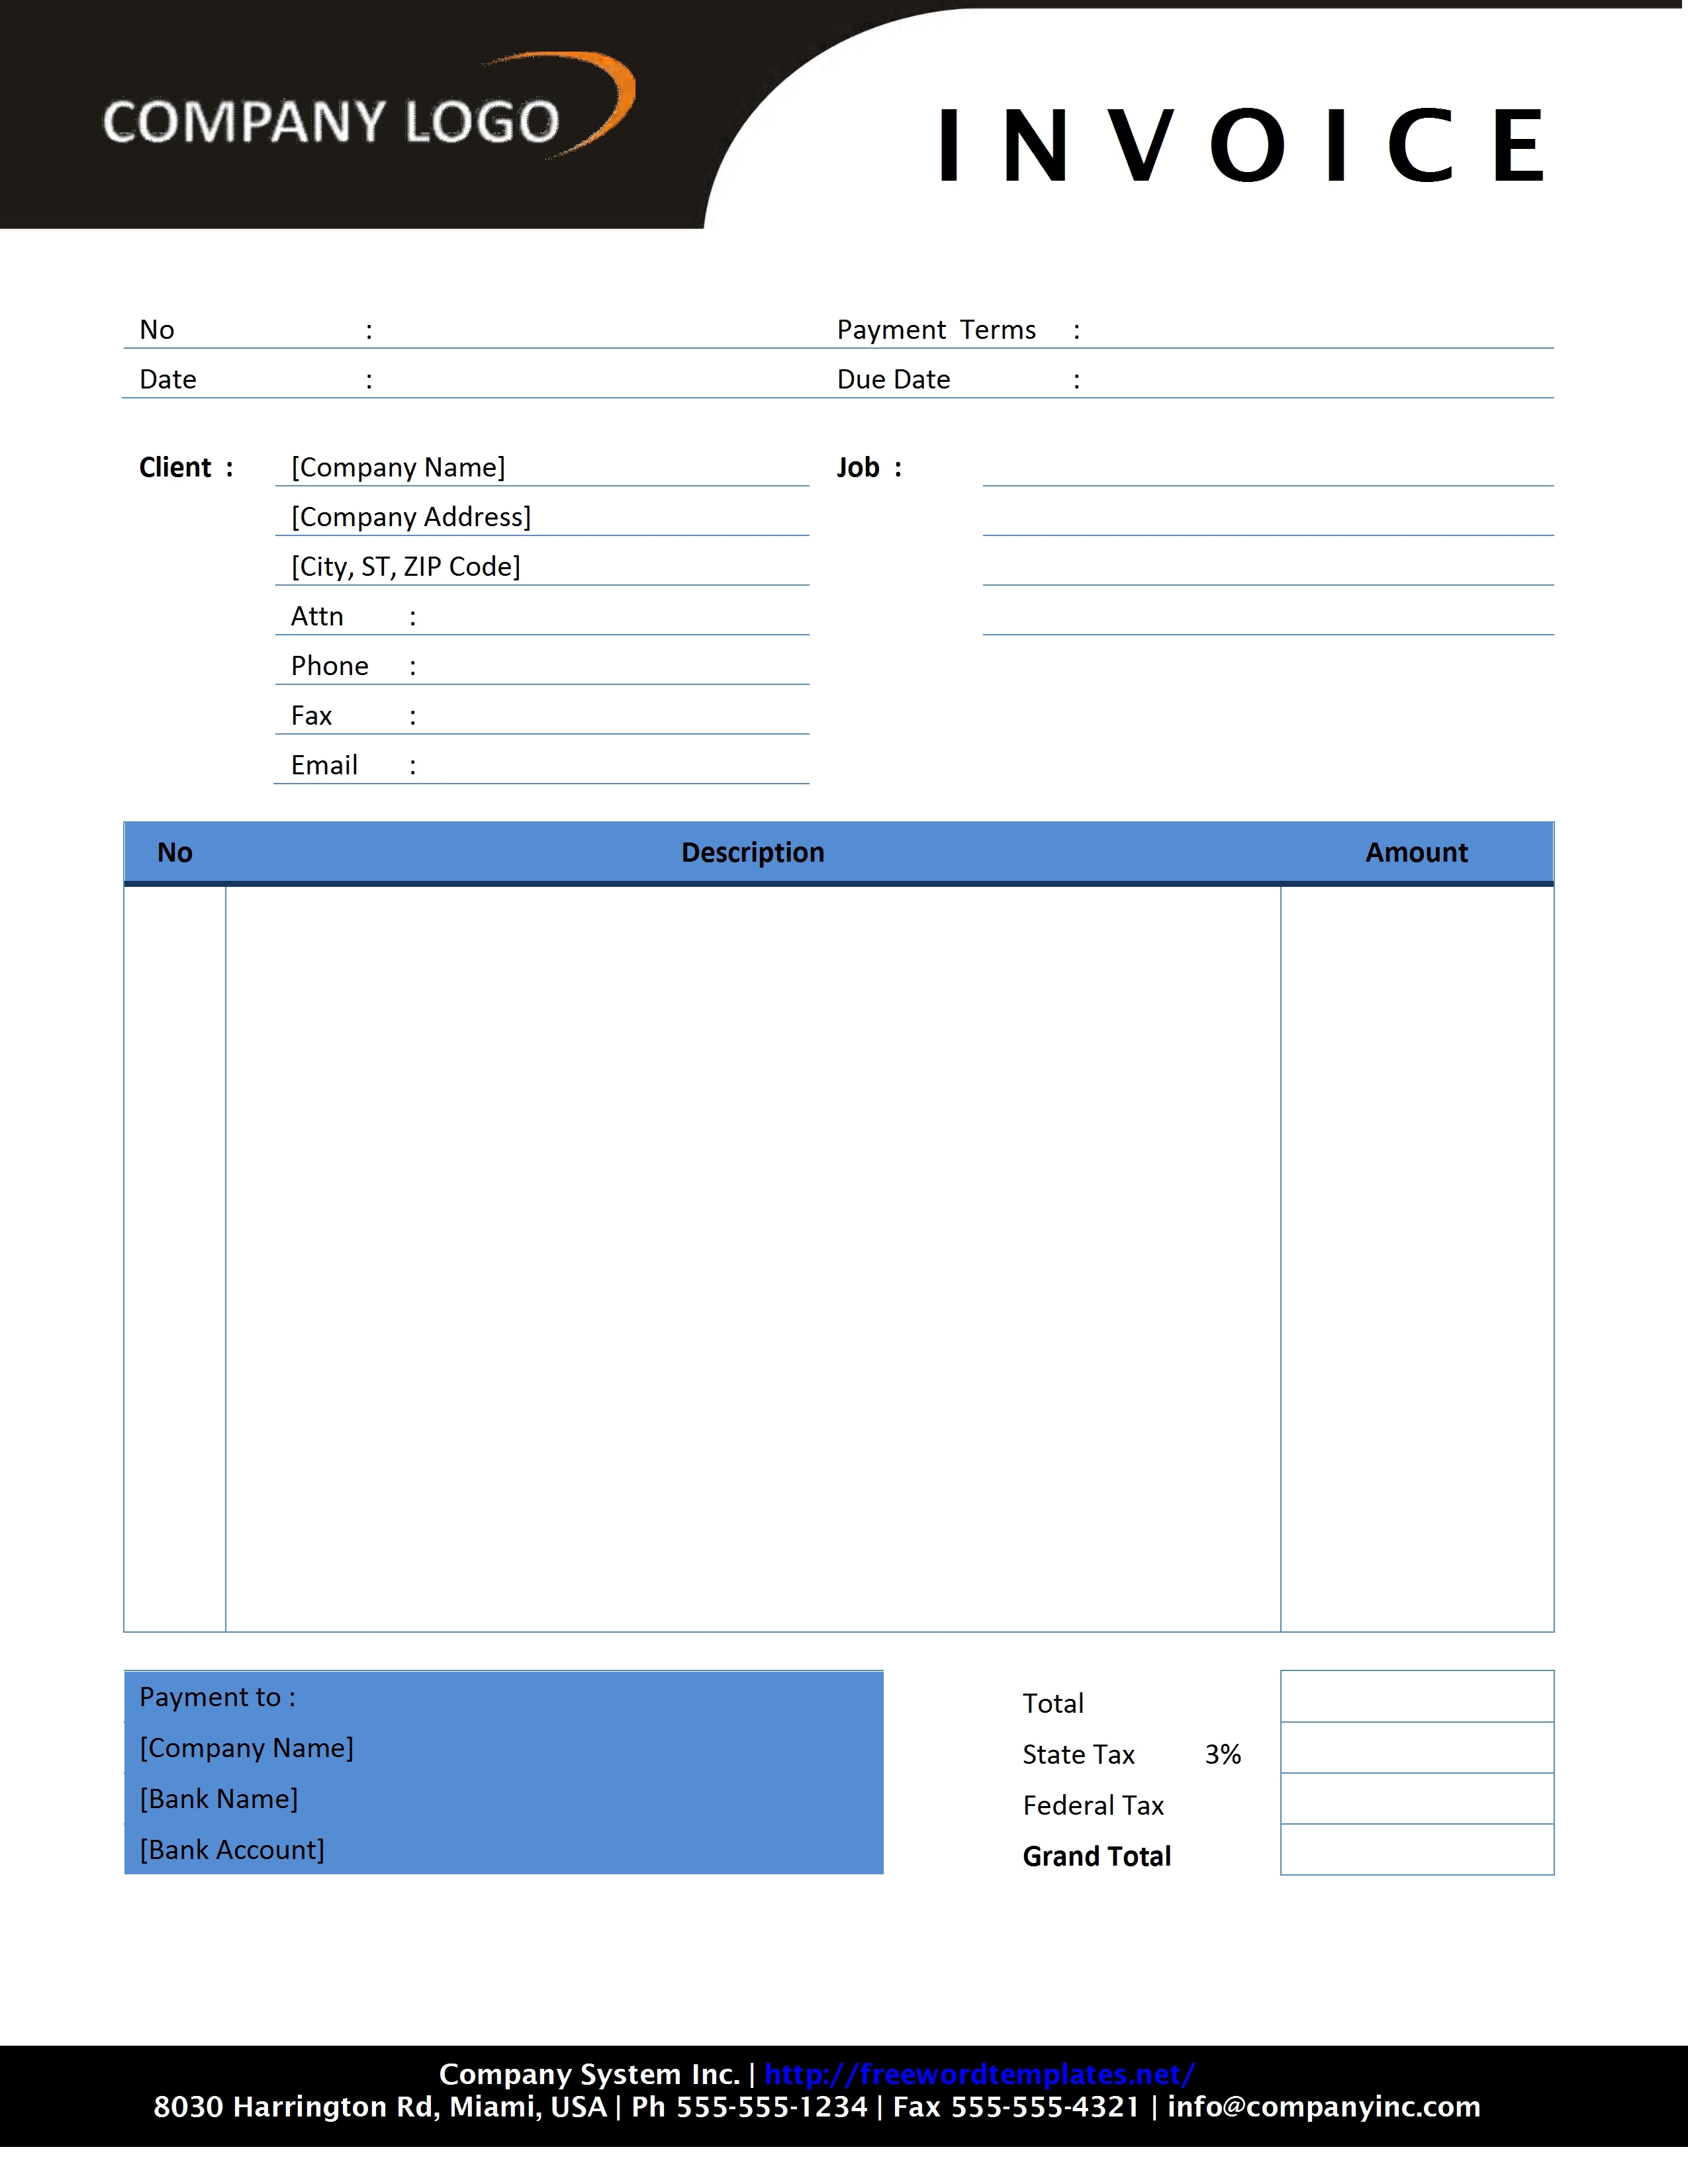 12 free downloadable invoice template word | top invoice templates download invoice template word